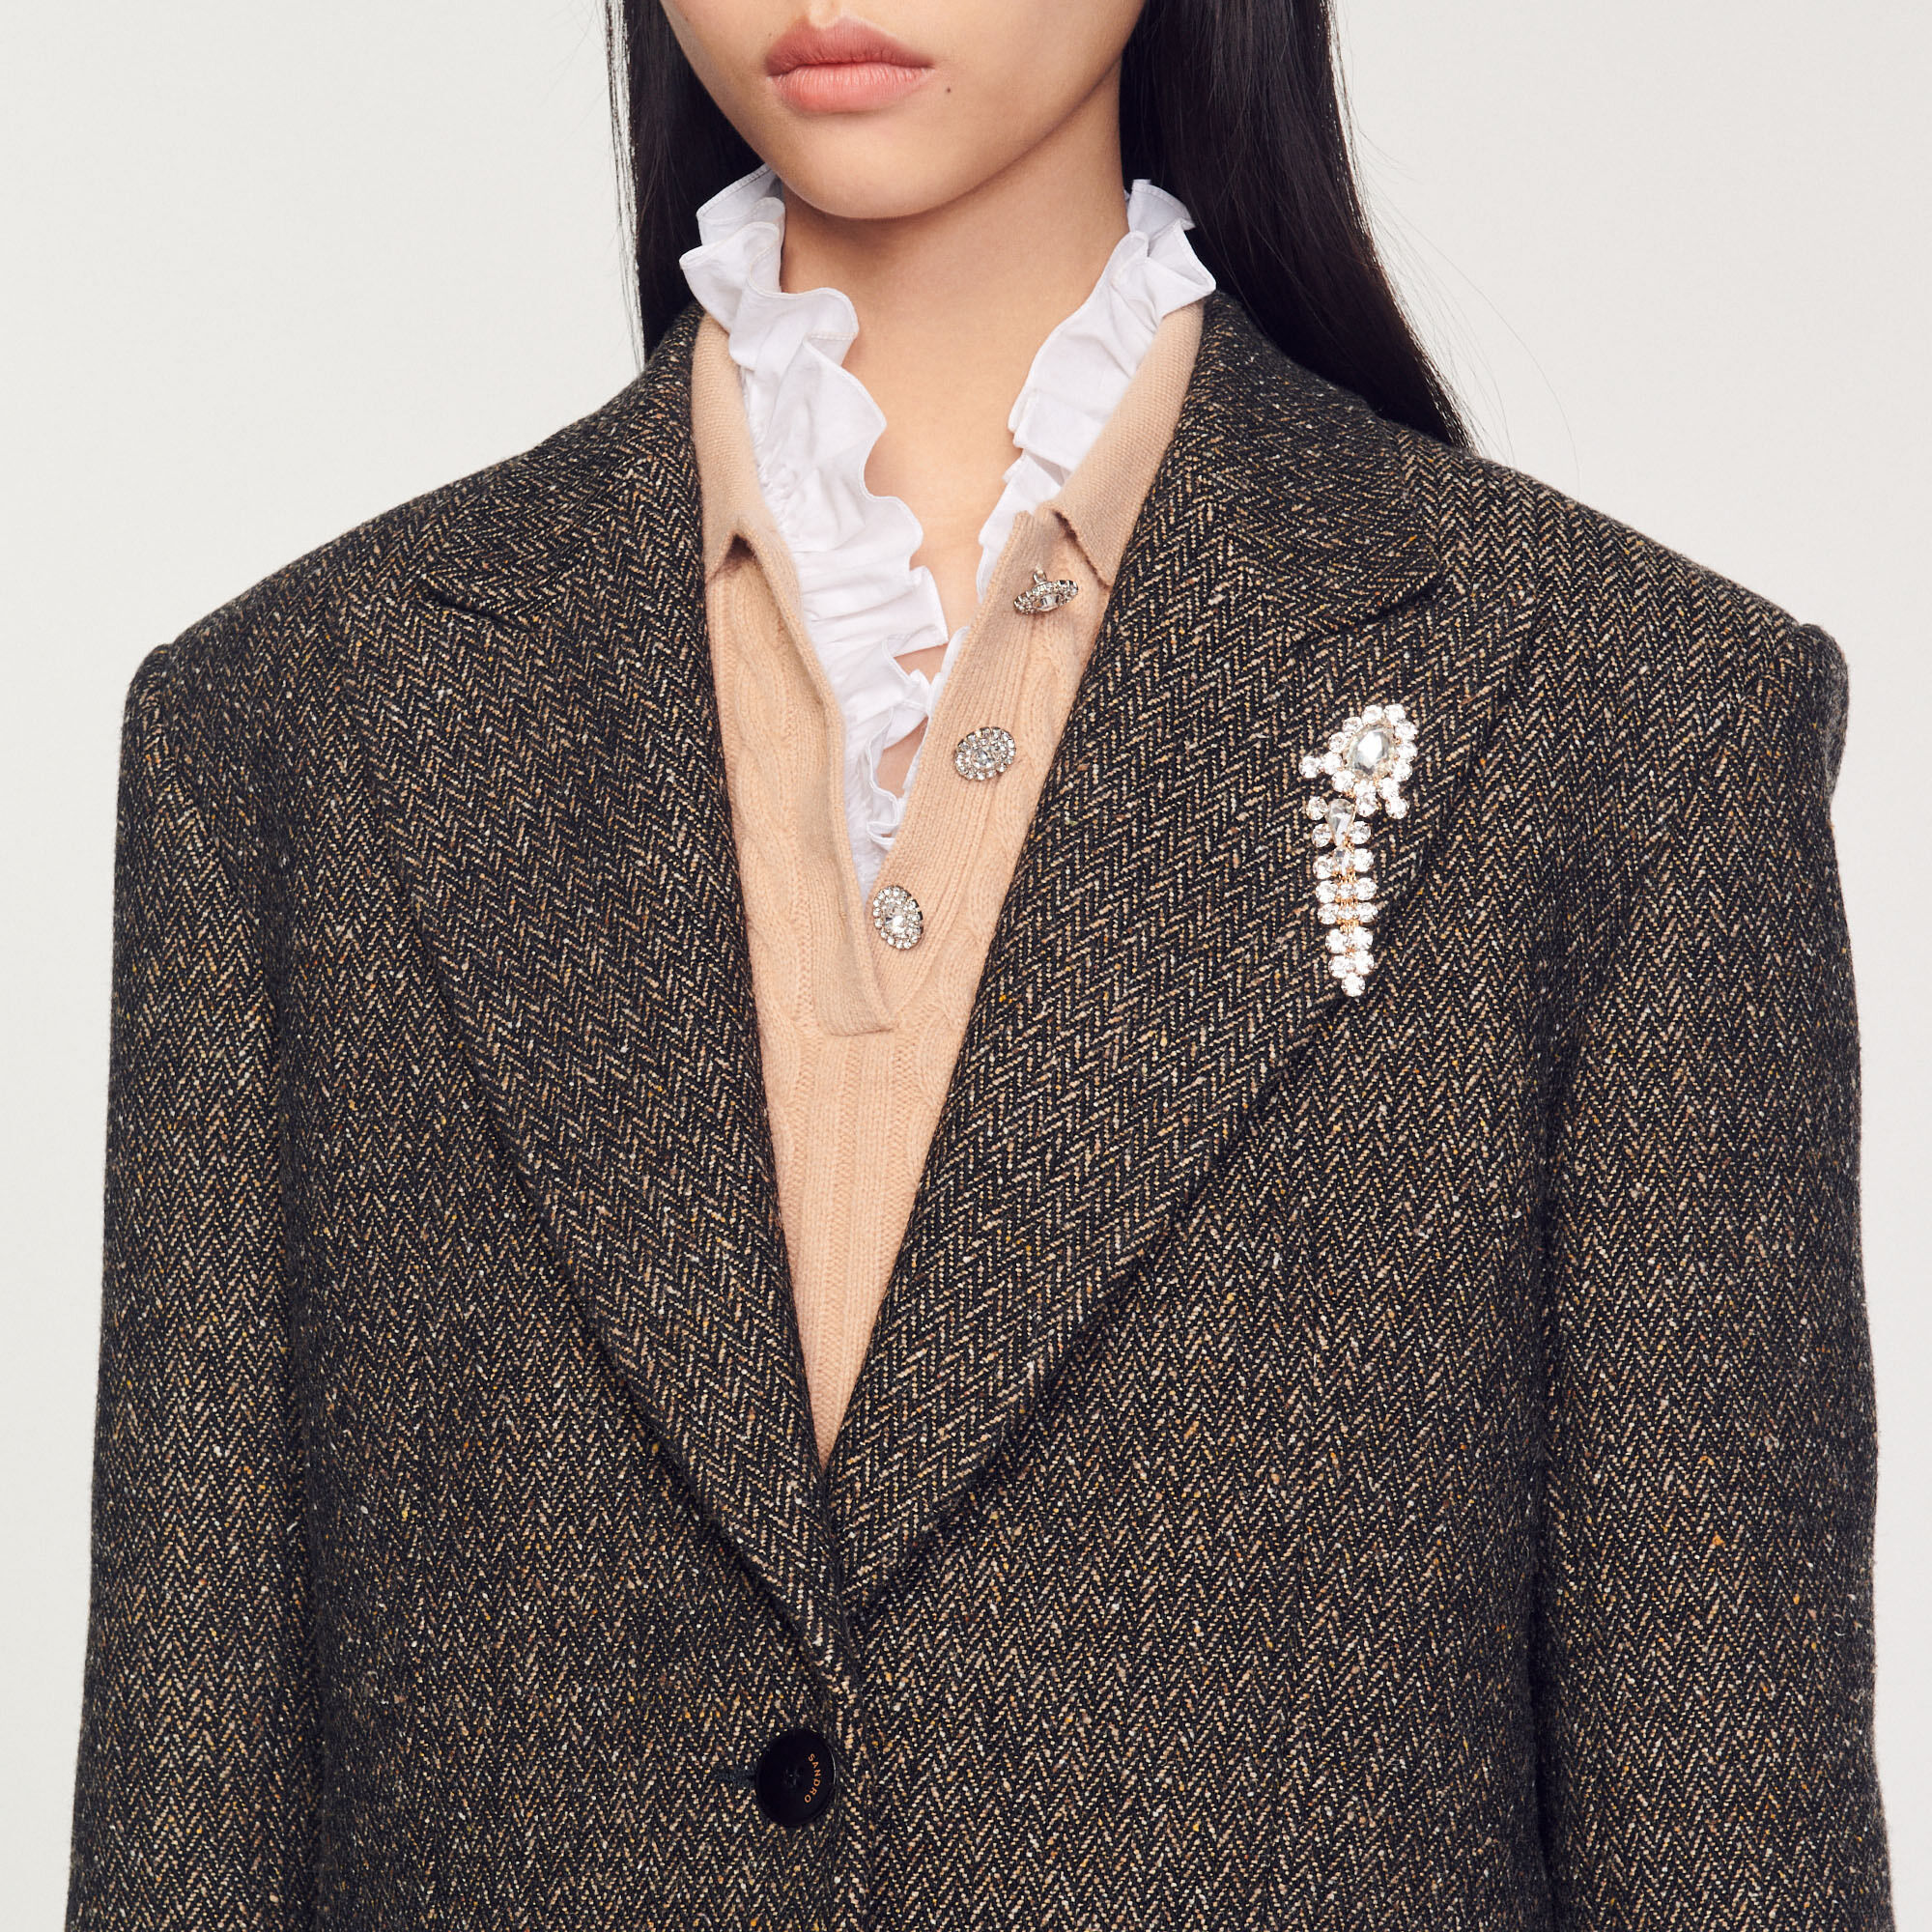 Tailored jacket with embellished brooch